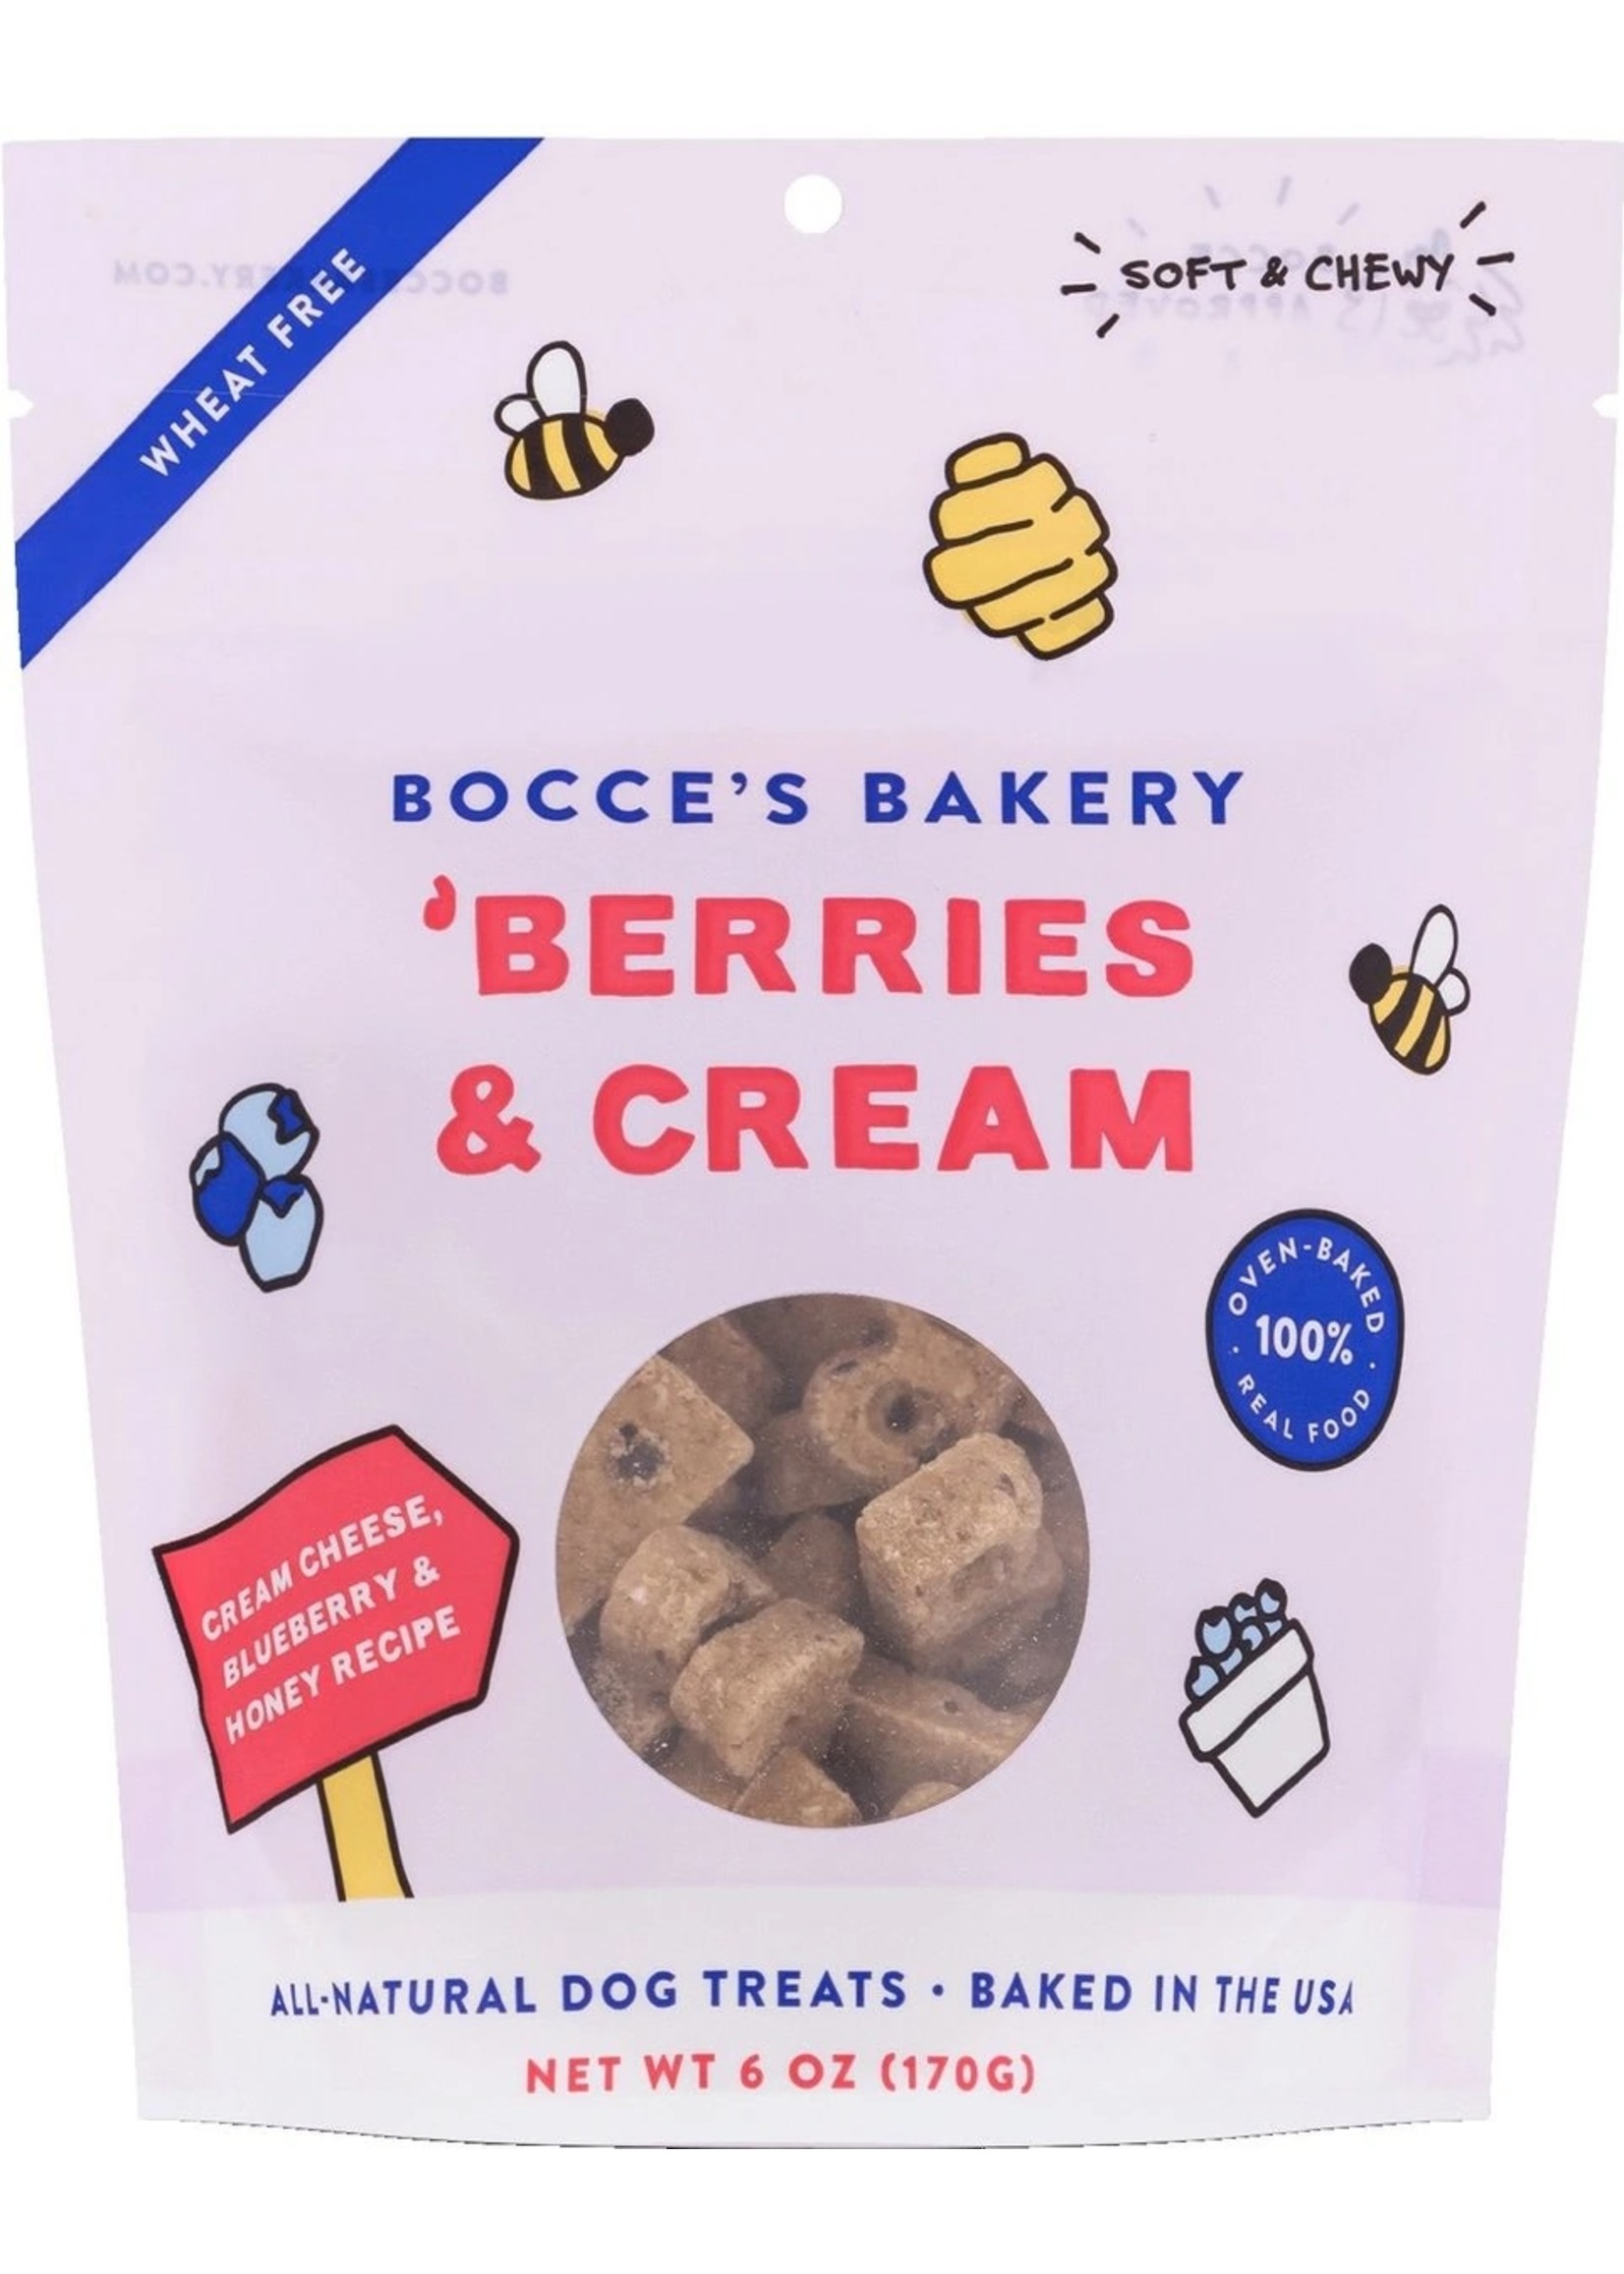 Bocce's Bakery Berries & Cream Soft & Chewy Dog Treats 6 oz